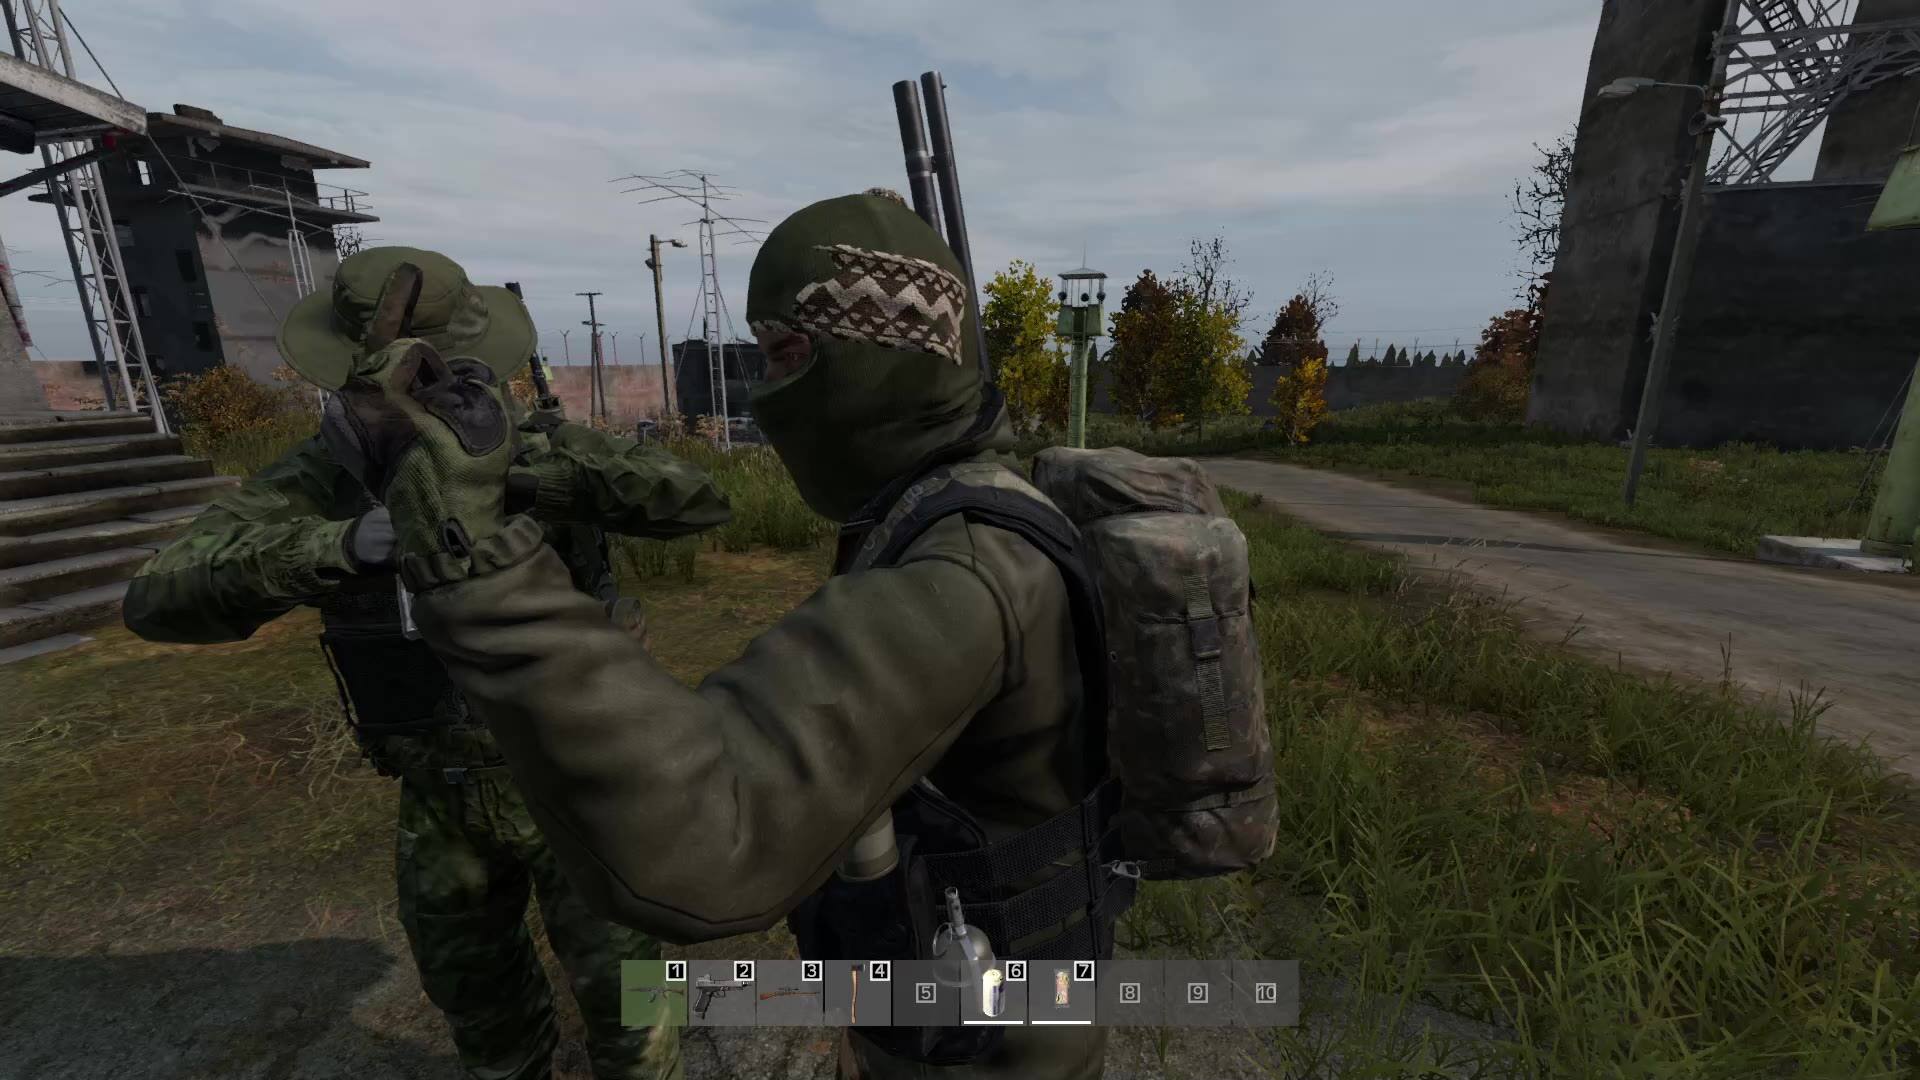 Funnymoments Hashtag in DayZ 